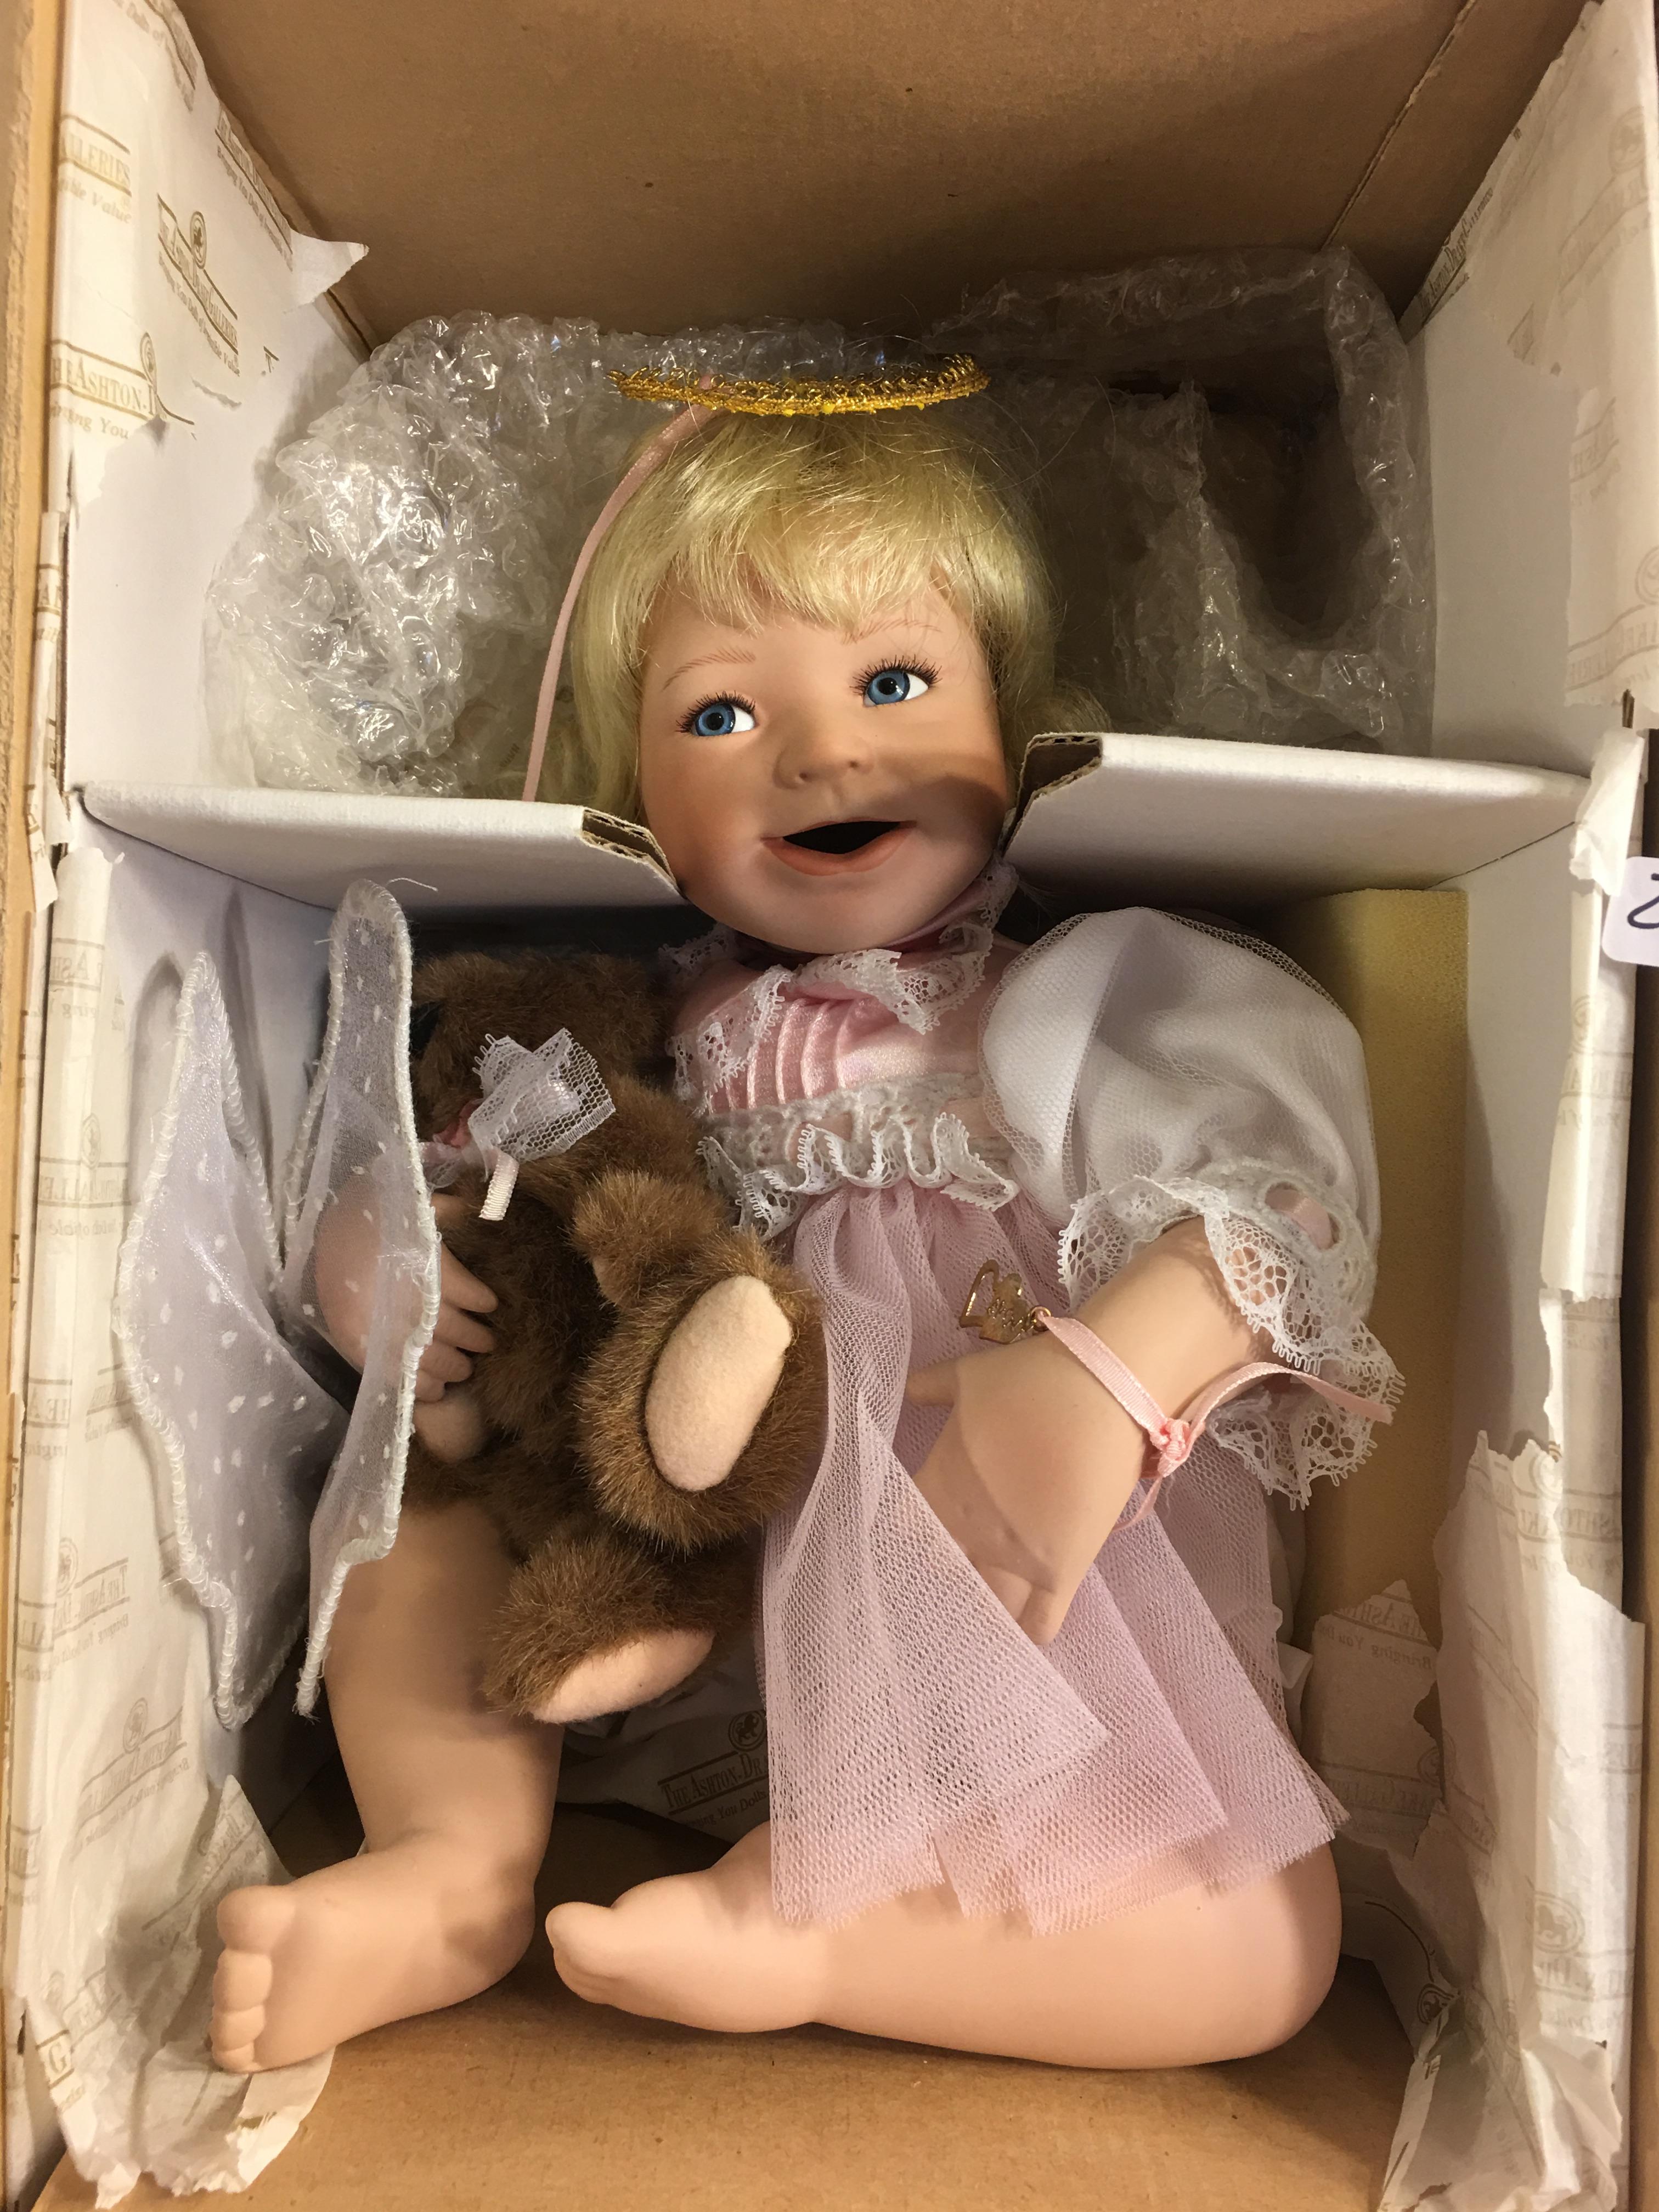 Collector Loose In Box the Ashton Drake Galleries 4 Of 5 Angel Babies Complete 12"tall Box